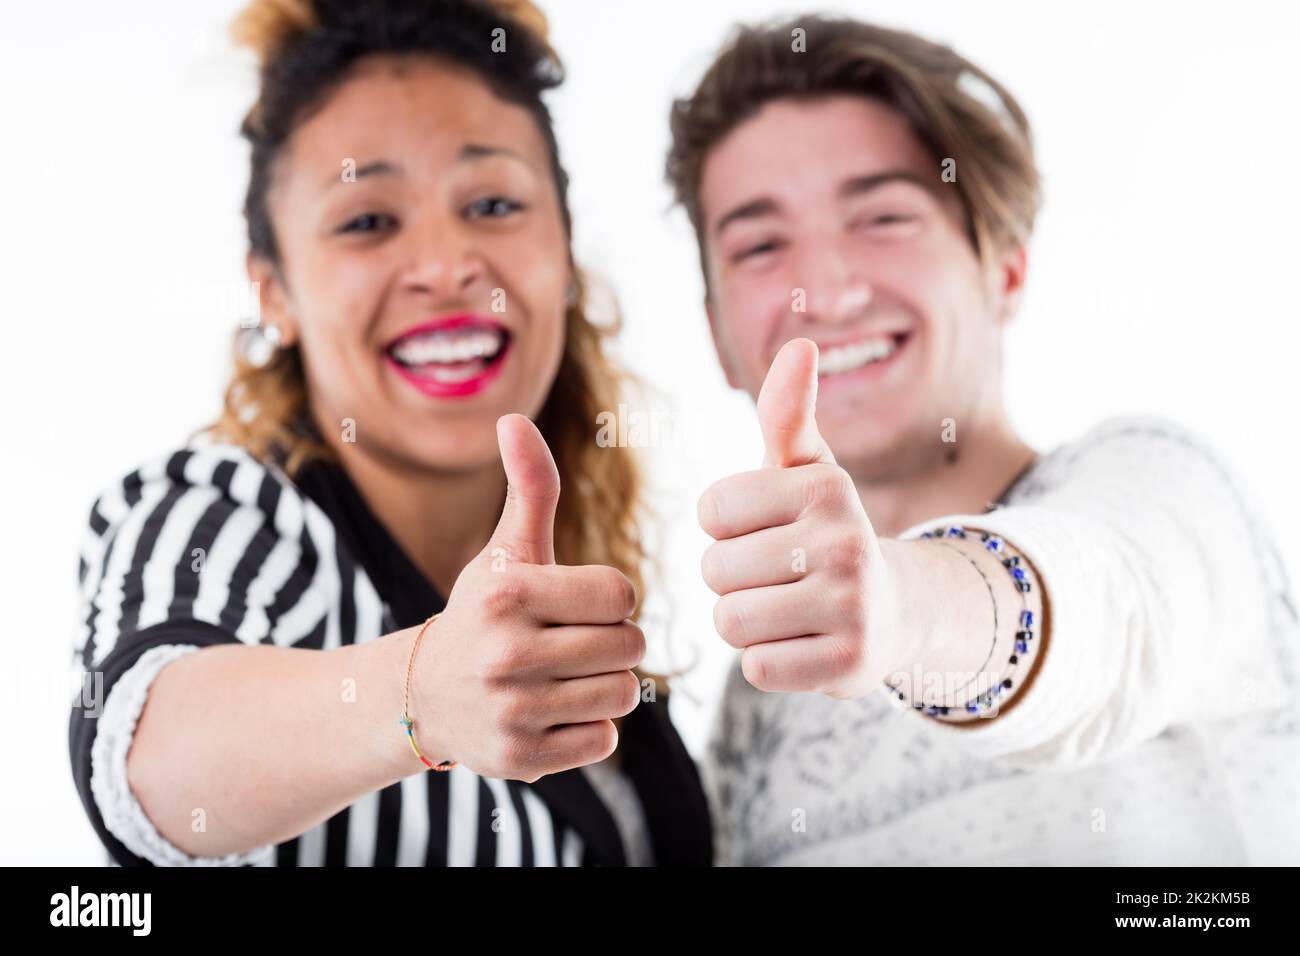 Two young happy people giving thumbs up Stock Photo